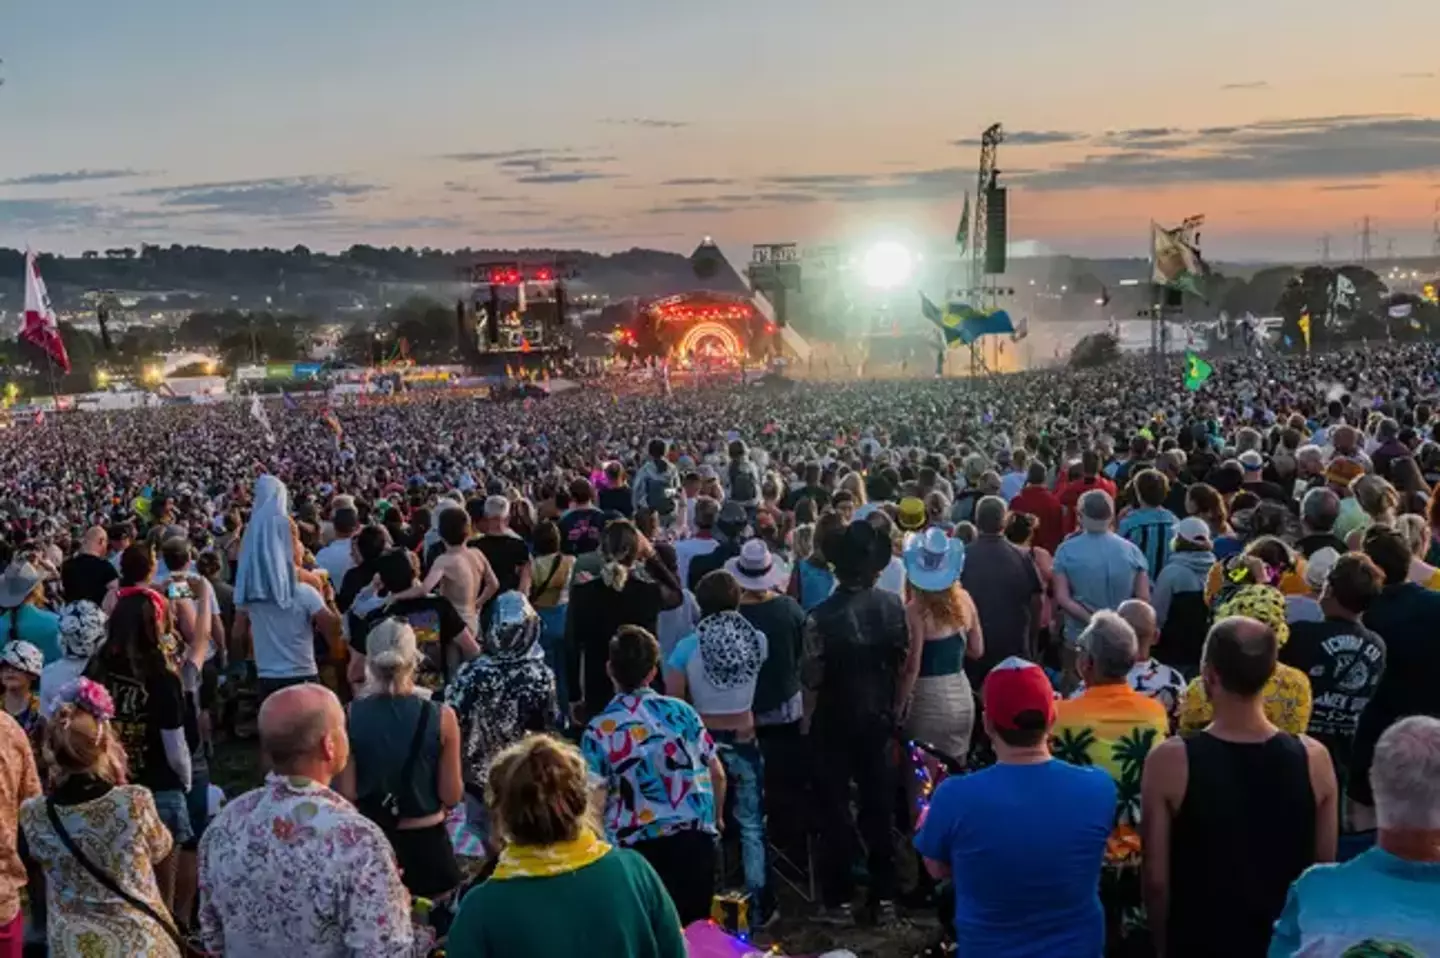 Glastonbury is incredibly popular but sadly two people have died at this year's festival.